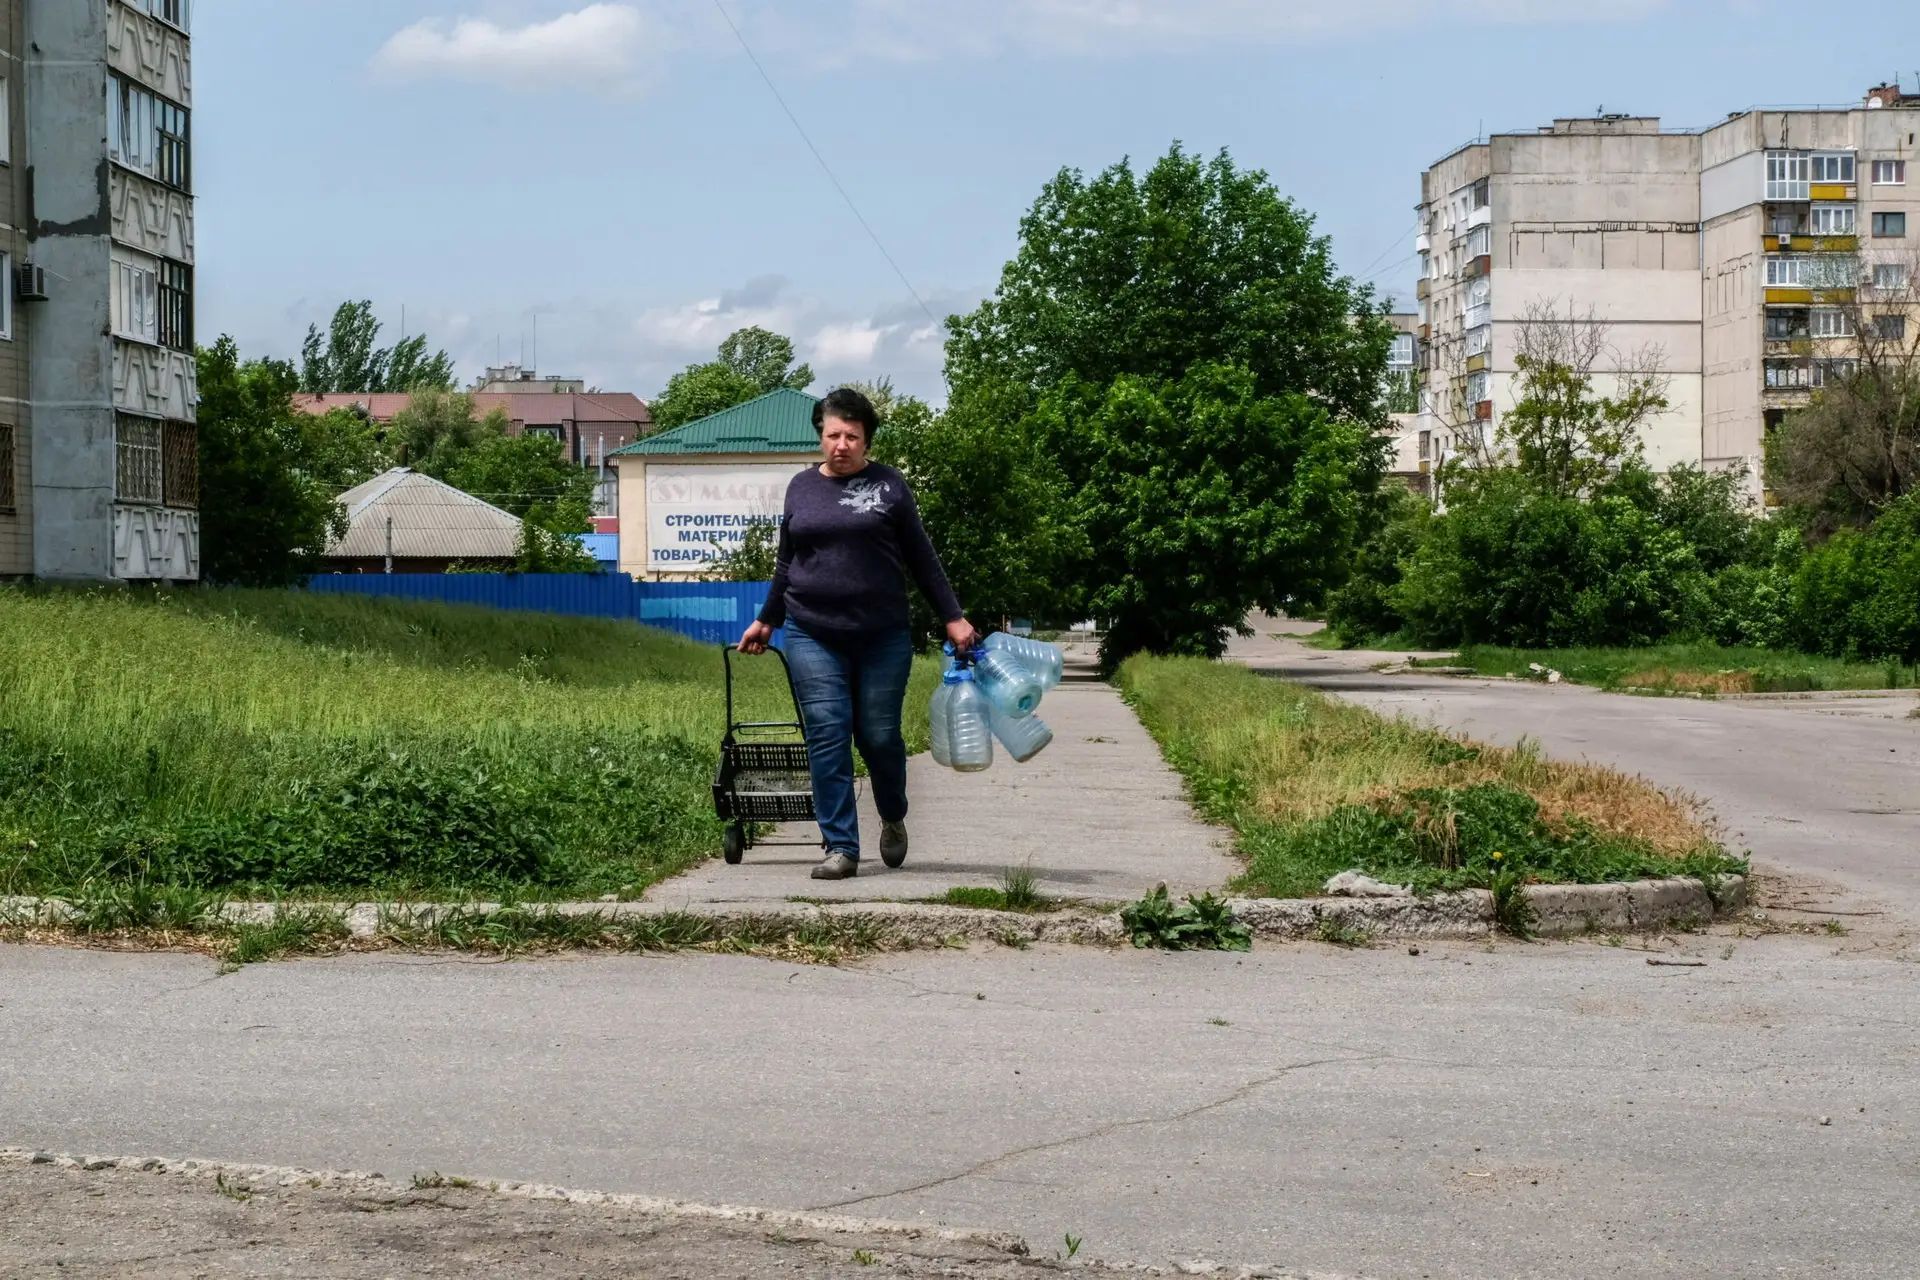 LYSYCHANSK, UKRAINE – 2022/05/28: A woman walks in an empty and deserted street of the city going to collect water. Lysychansk is a city on the high right bank of the Donets River in the Luhansk region. The city is part of a metropolitan area including Severodonetsk and Rubizhne; the three towns constitute one of Ukraine’s largest chemical complexes. Lysychansk is now the frontline since the Russian troops destroyed the bridge connecting Severodonetsk to Lysychansk. Russian troops are attacking the city and moving towards it. The Russian army occupies the main road that connects Lysychansk to Kramatorsk. (Photo by Rick Mave/SOPA Images/LightRocket via Getty Images)